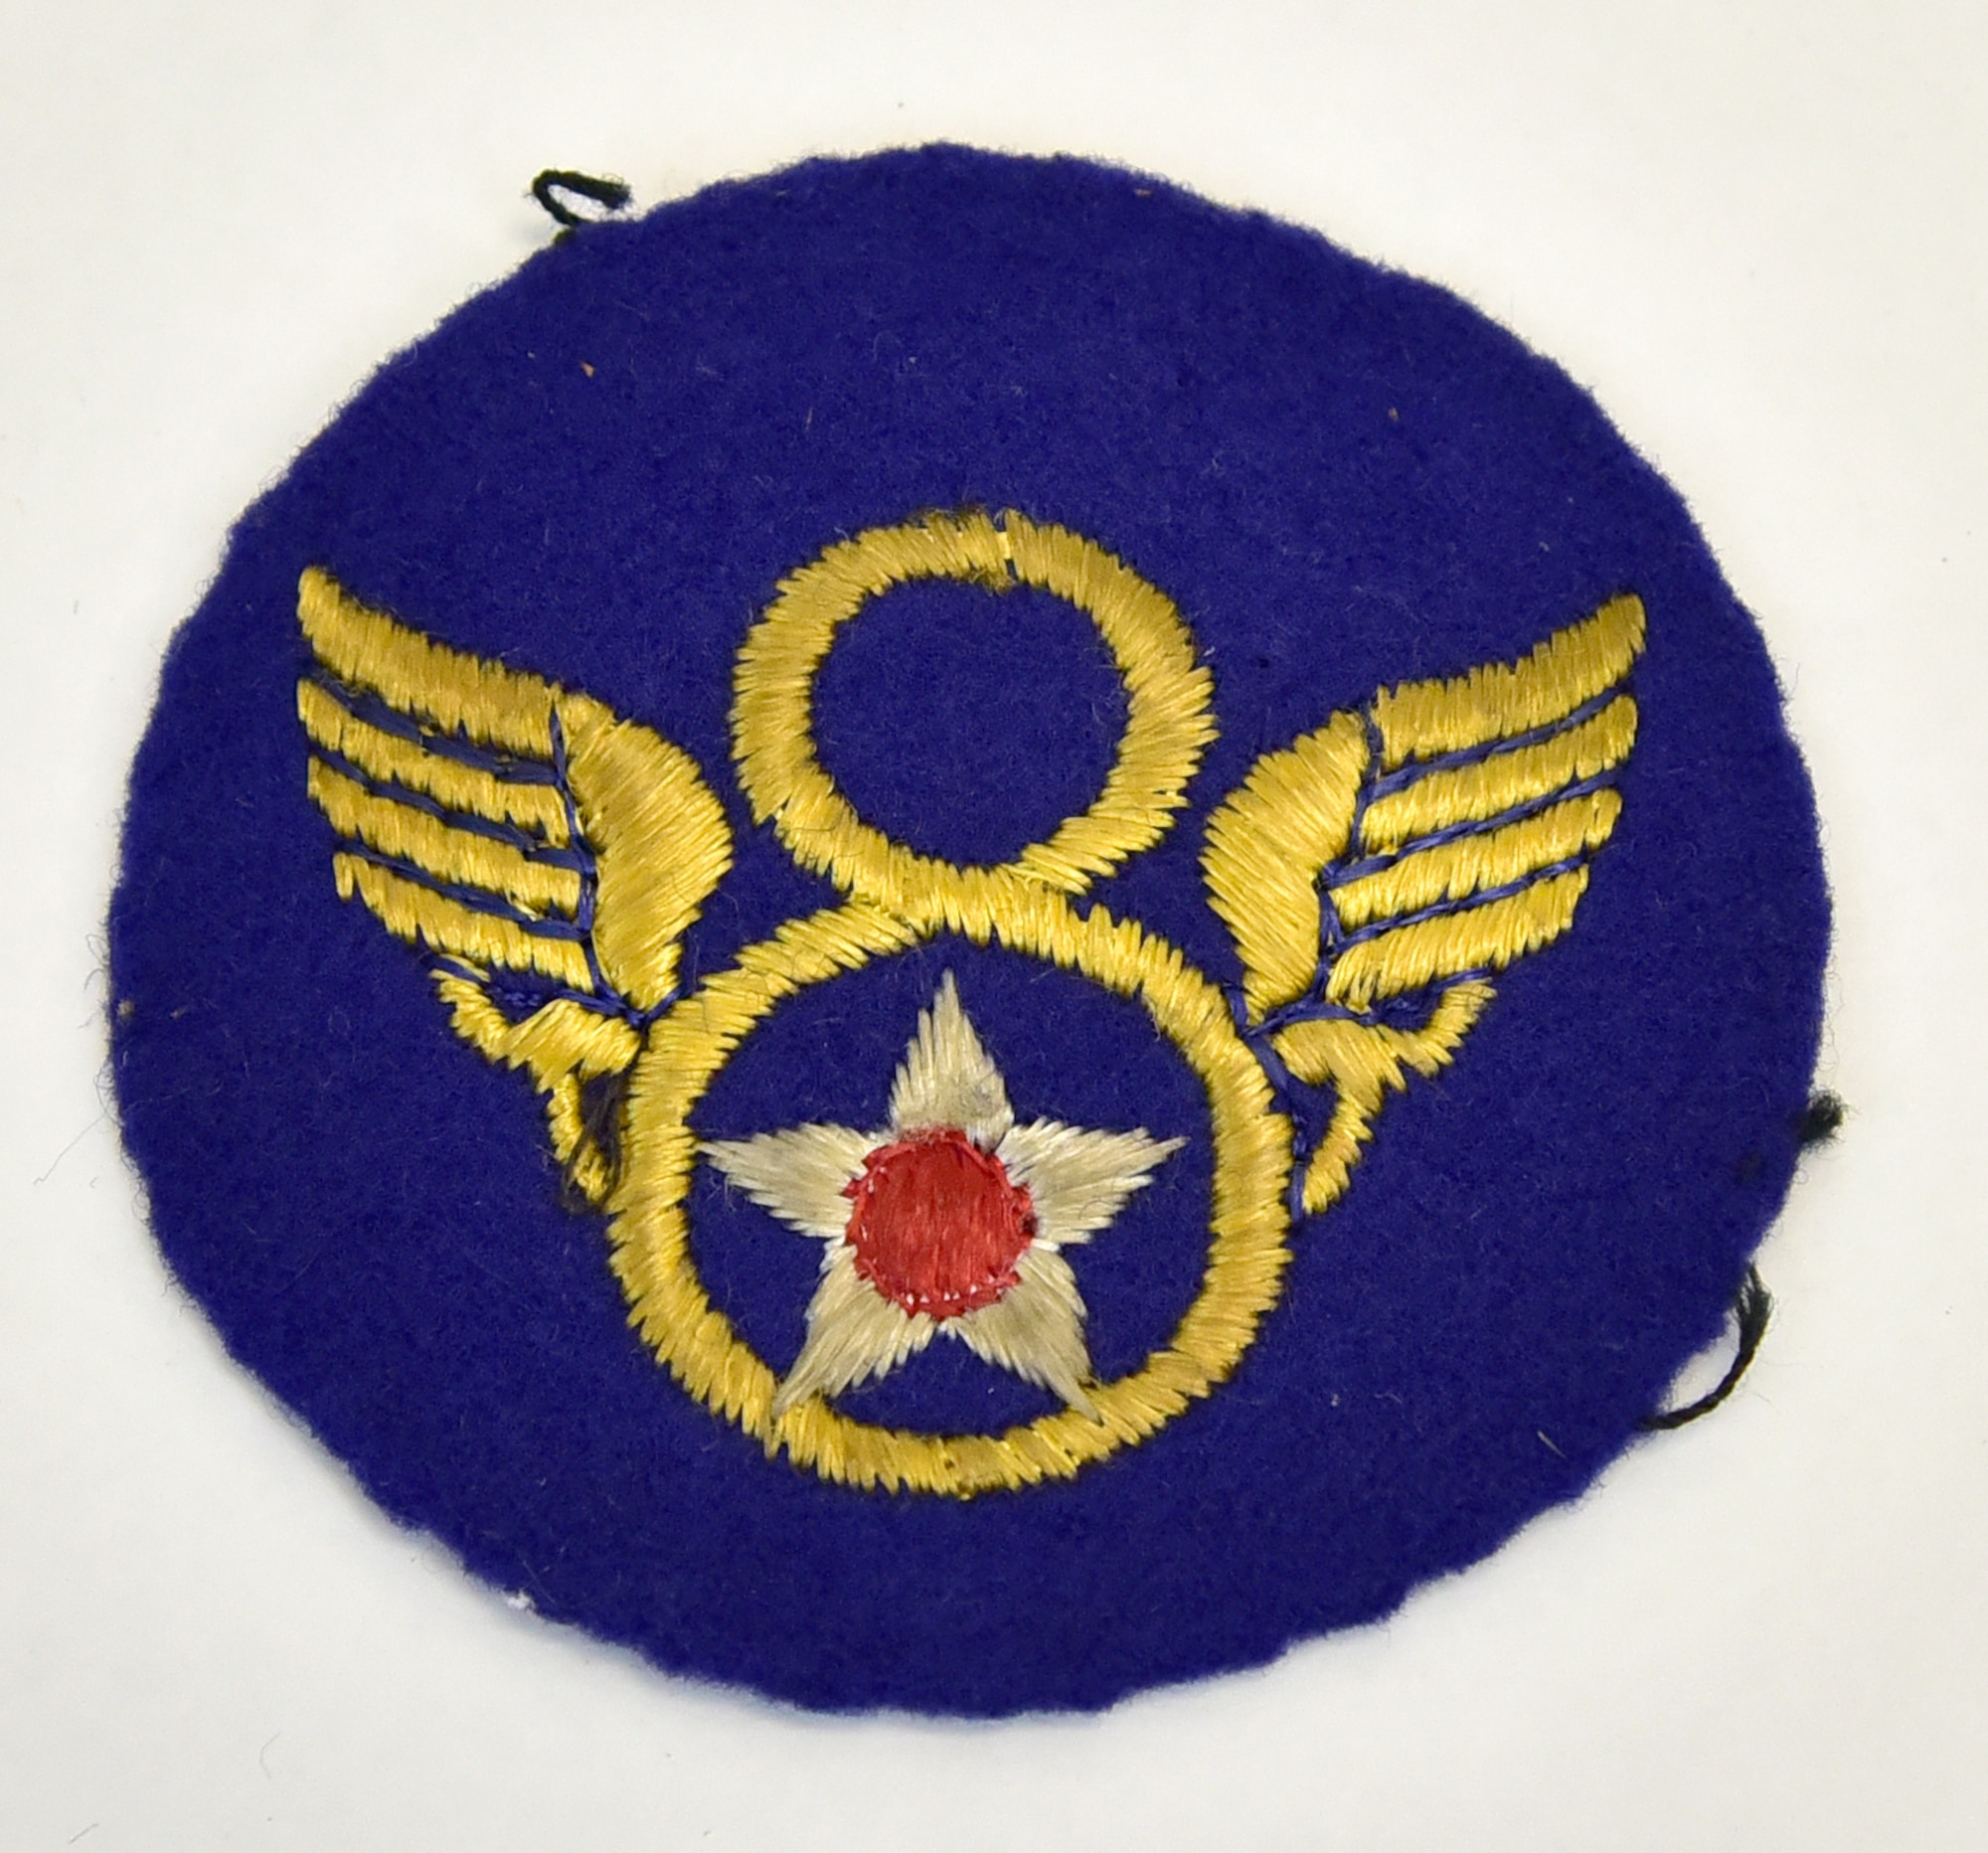 Plans call for this artifact to be displayed near the B-17F Memphis Belle™ as part of the new strategic bombardment exhibit in the WWII Gallery, which opens to the public on May 17, 2018. Memphis Belle waist gunner SSgt E. Scott Miller wore this Eighth Air Force patch. Miller was credited with shooting down an Fw 190 fighter.